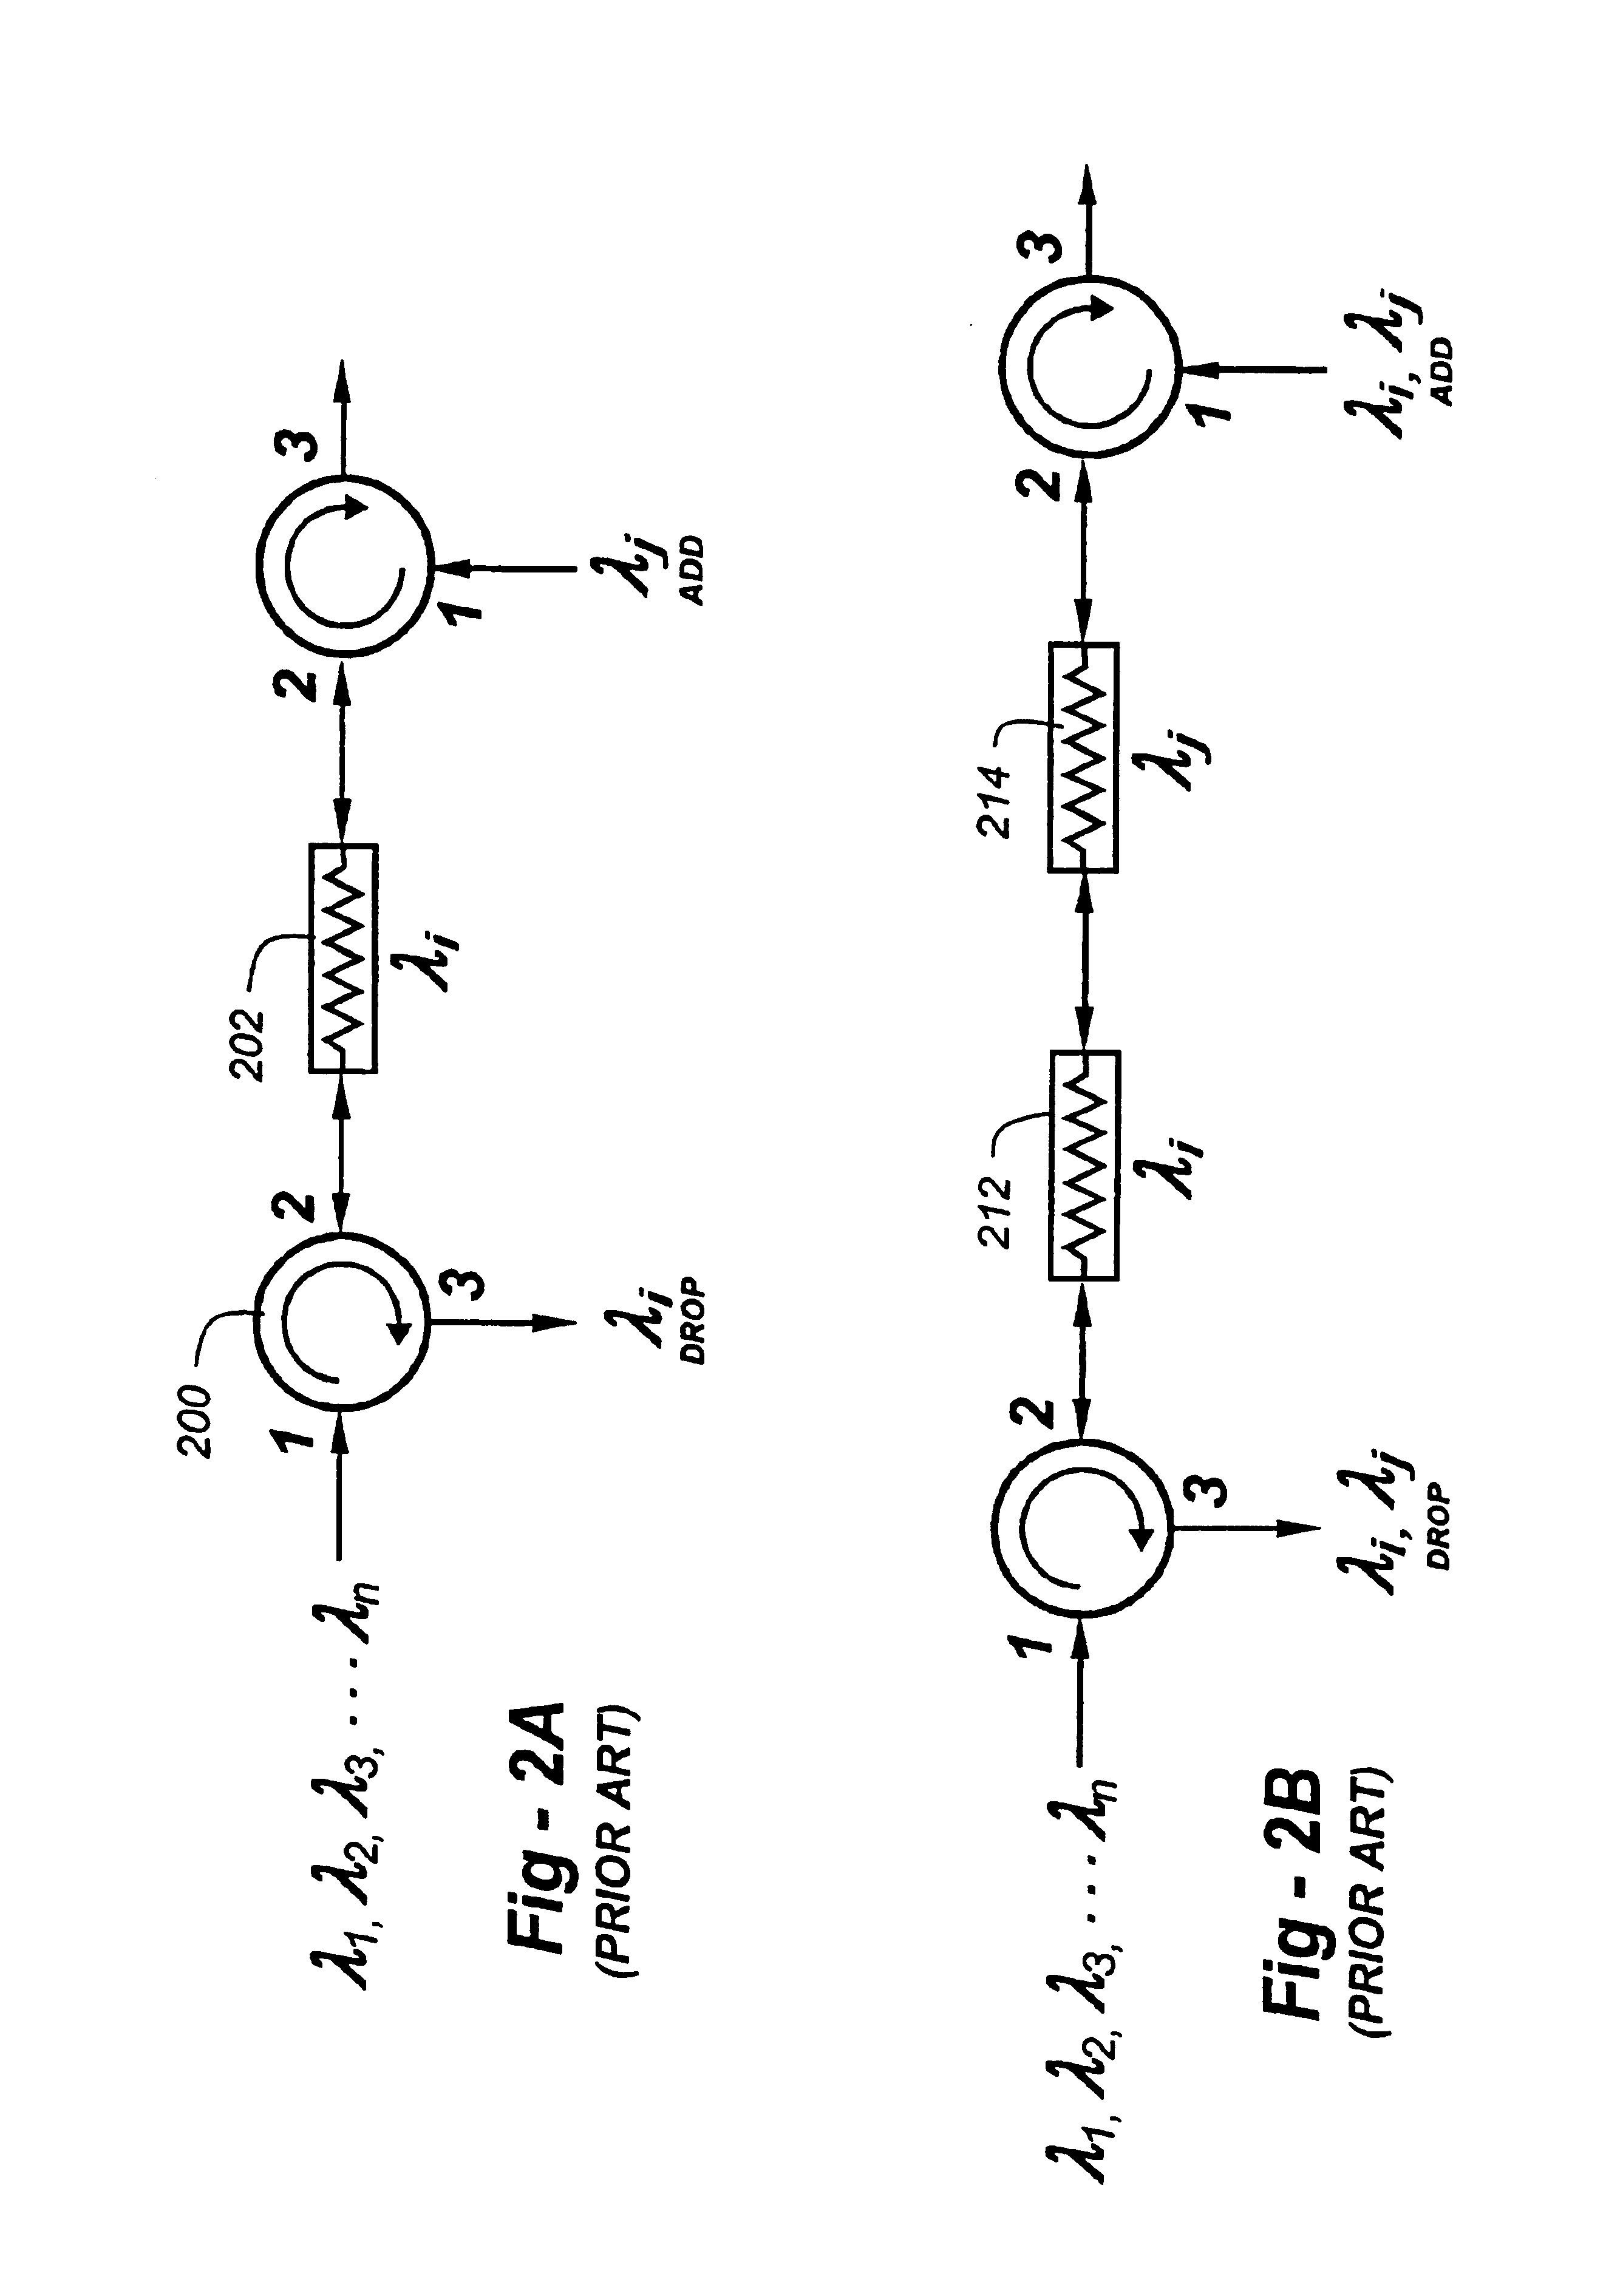 Configurable wavelength routing device